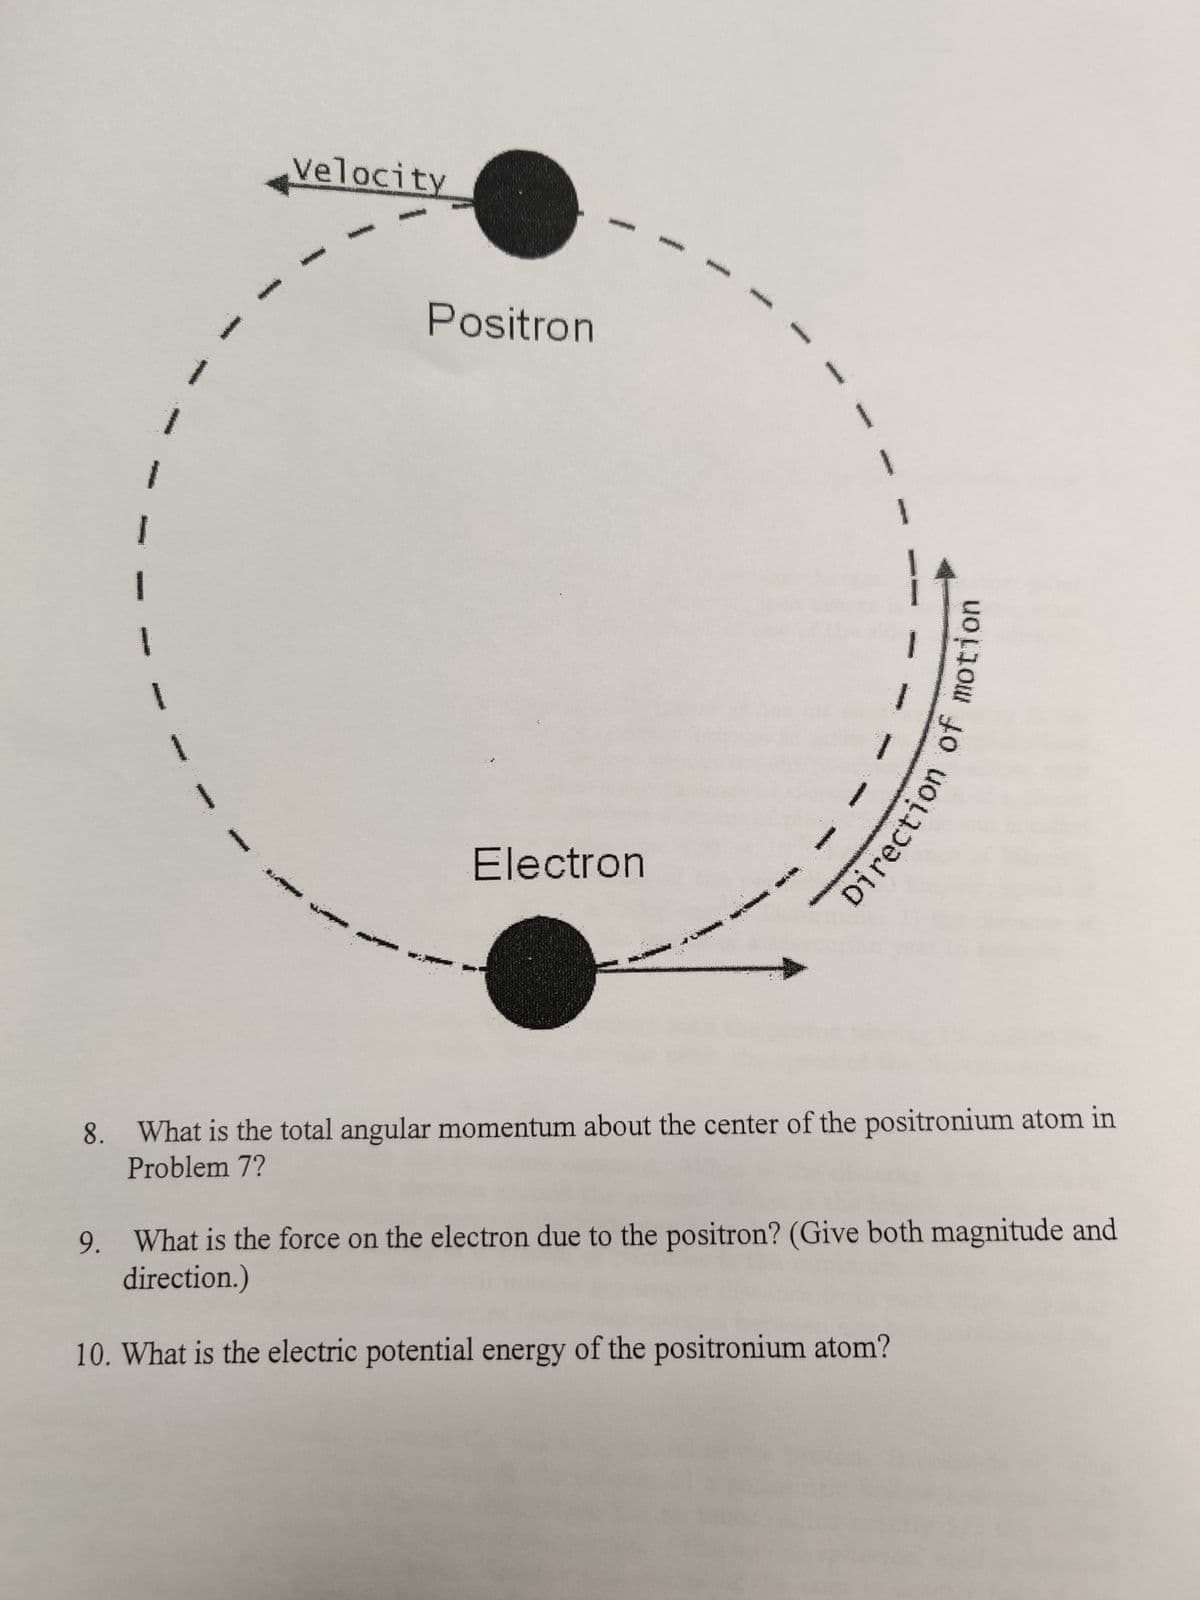 *
Velocity
p
Positron
Electron
Direction of motion
8. What is the total angular momentum about the center of the positronium atom in
Problem 7?
9. What is the force on the electron due to the positron? (Give both magnitude and
direction.)
10. What is the electric potential energy of the positronium atom?